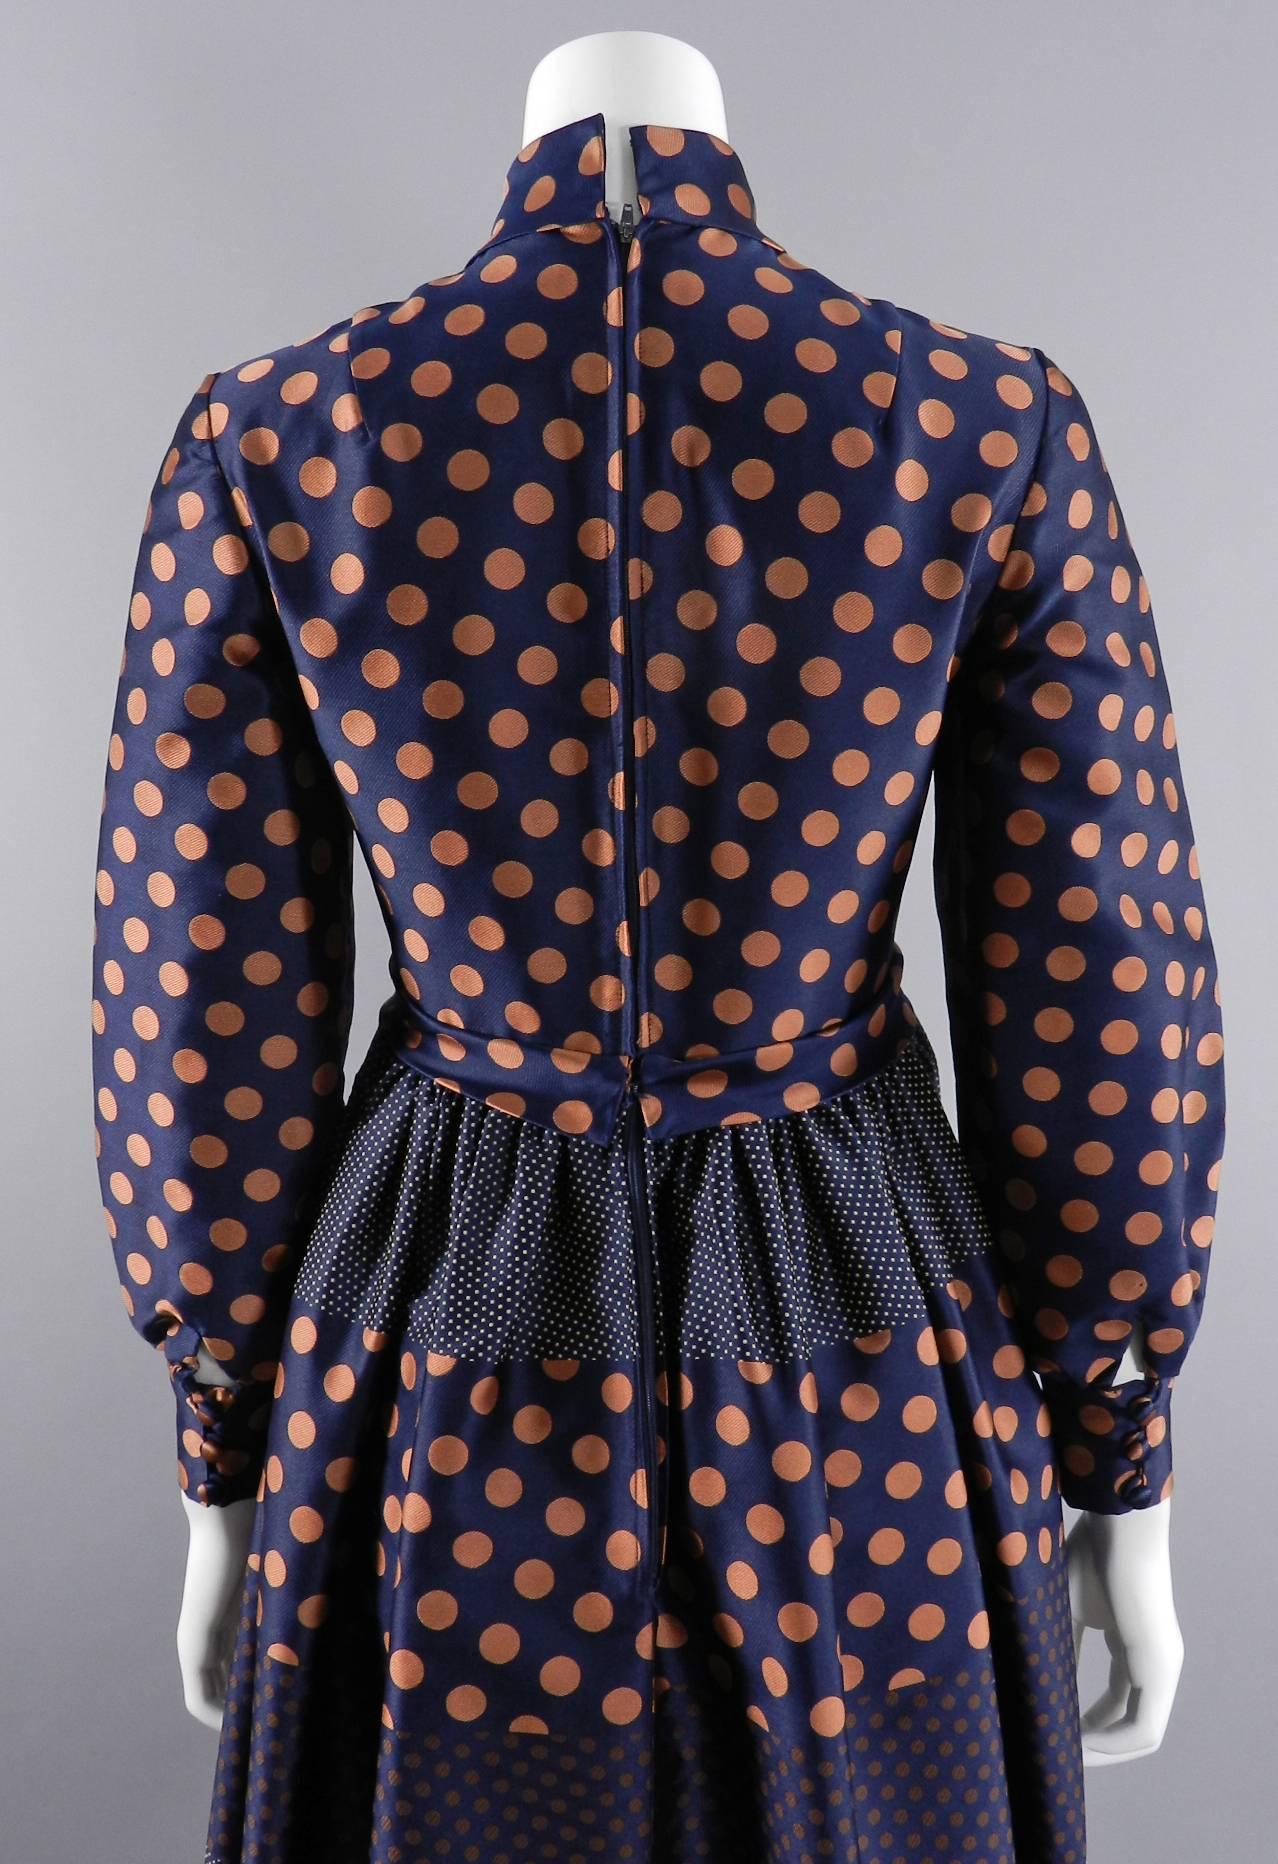 Geoffrey Beene 1970's Polkadot Gown with bow at Neck For Sale 2